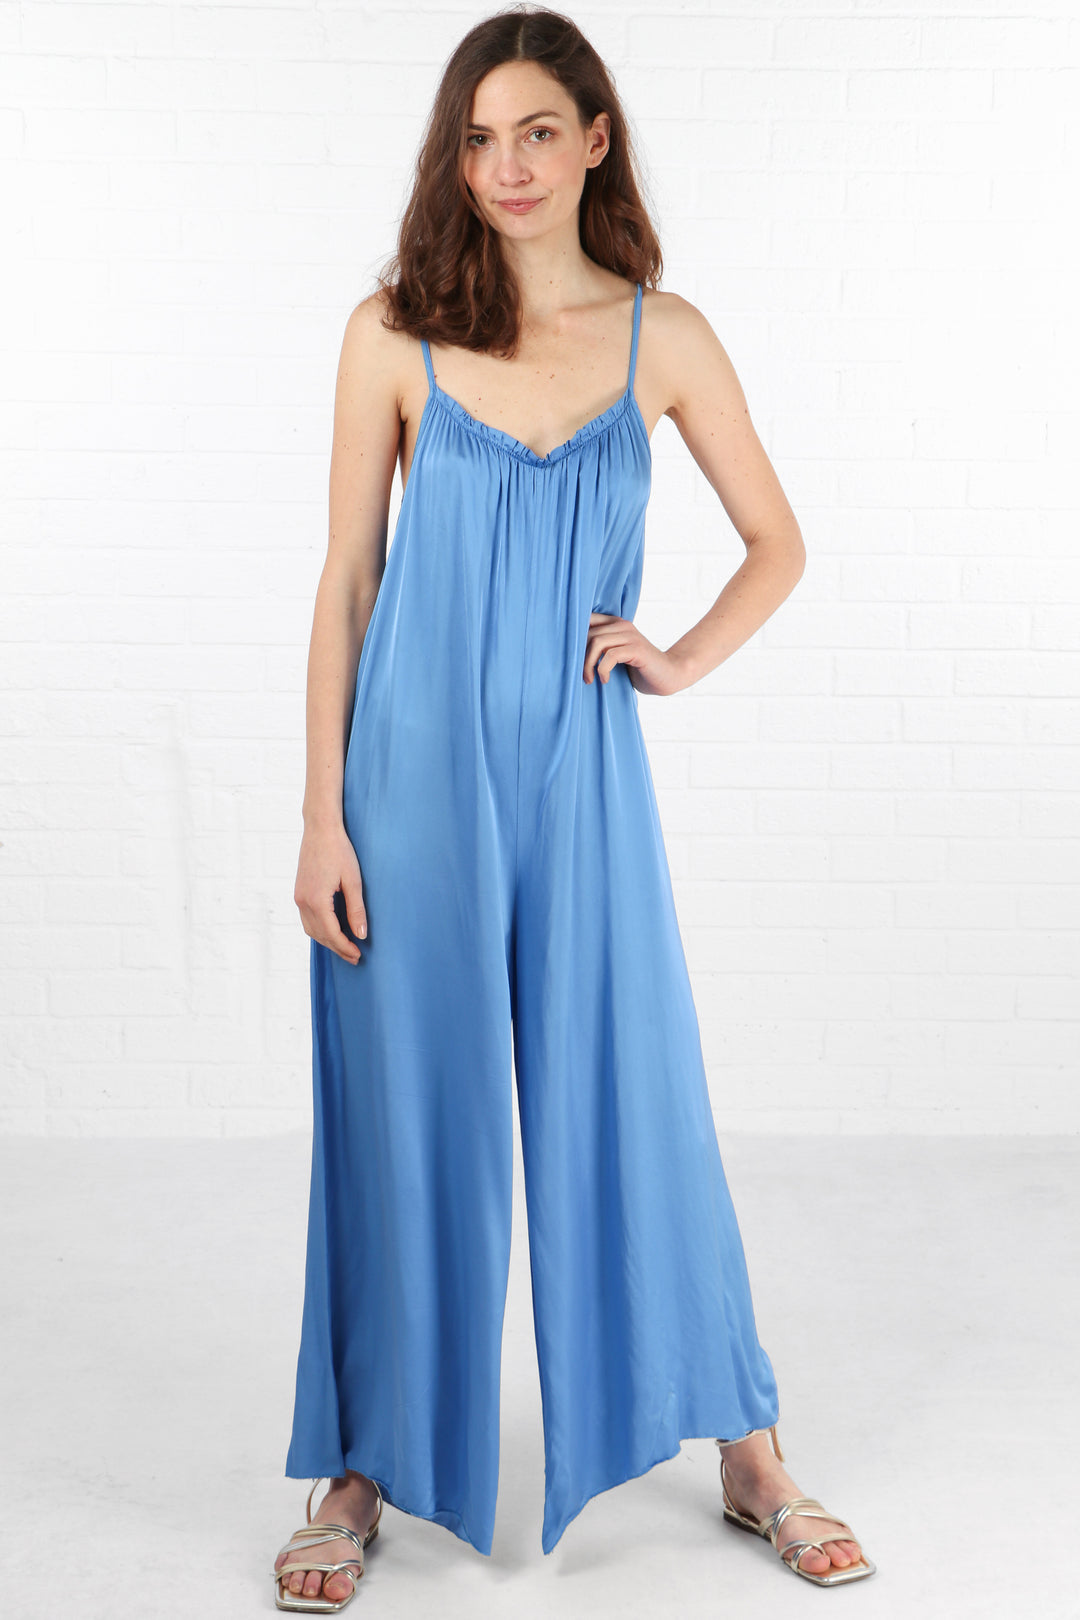 model wearing an azure blue wide leg jumpsuit with a v neck and spaghetti straps